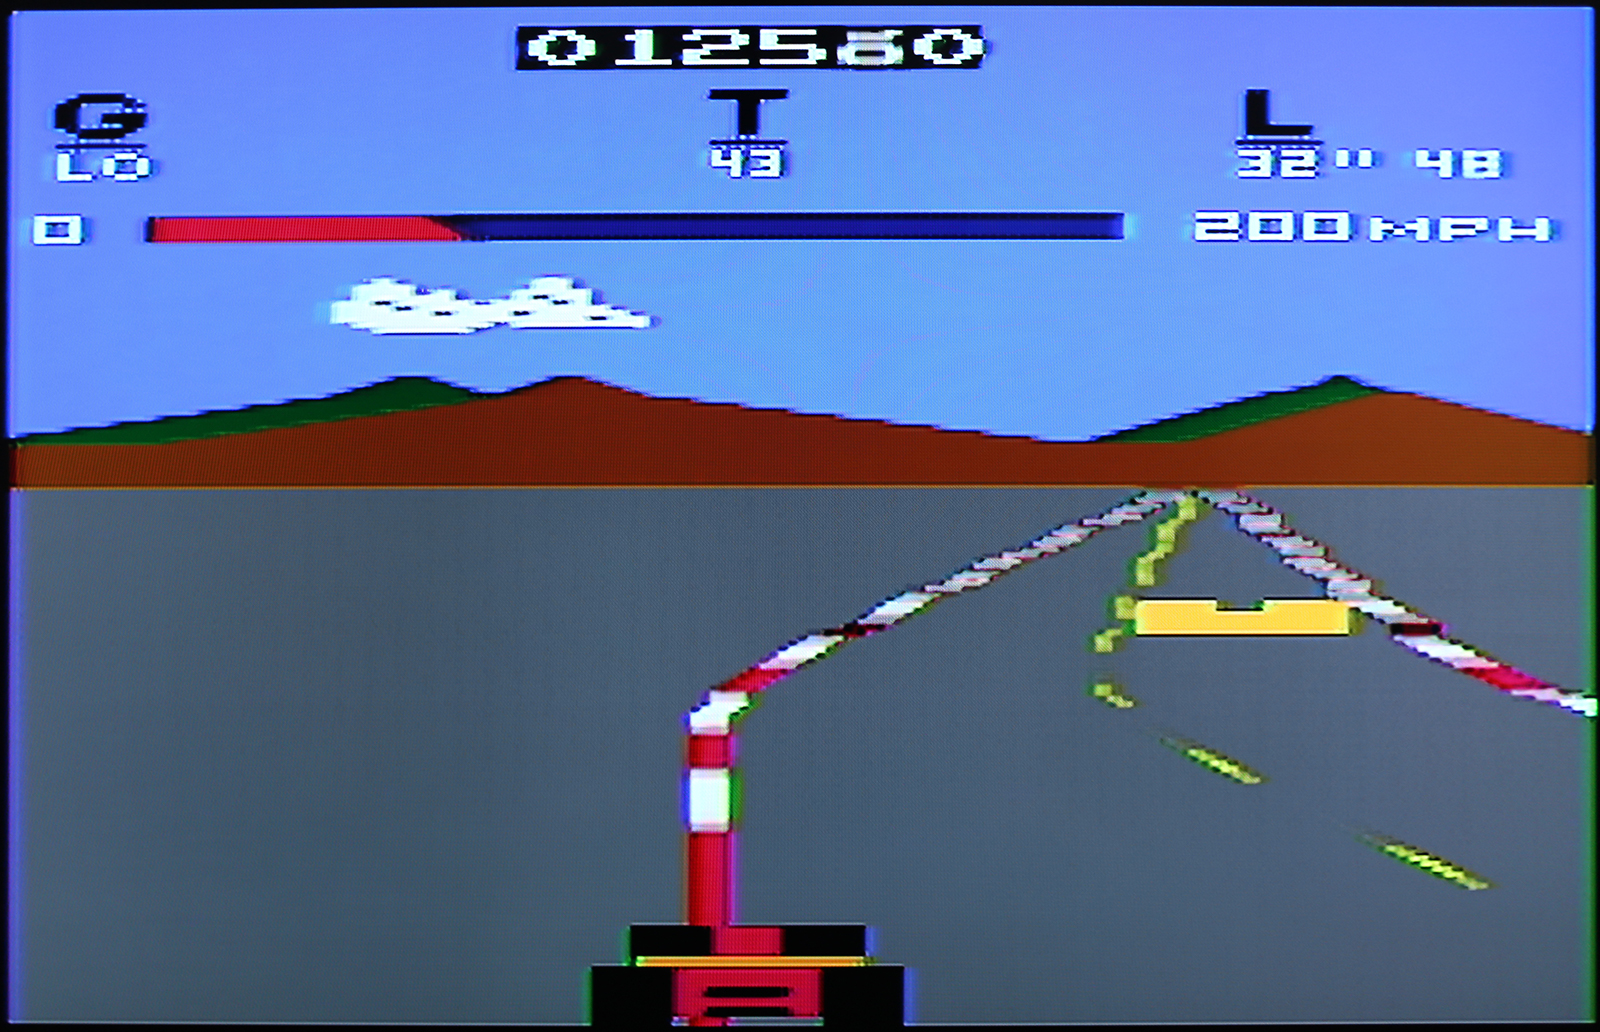 Pole Position on atari 2600 composite output after installing video mod board